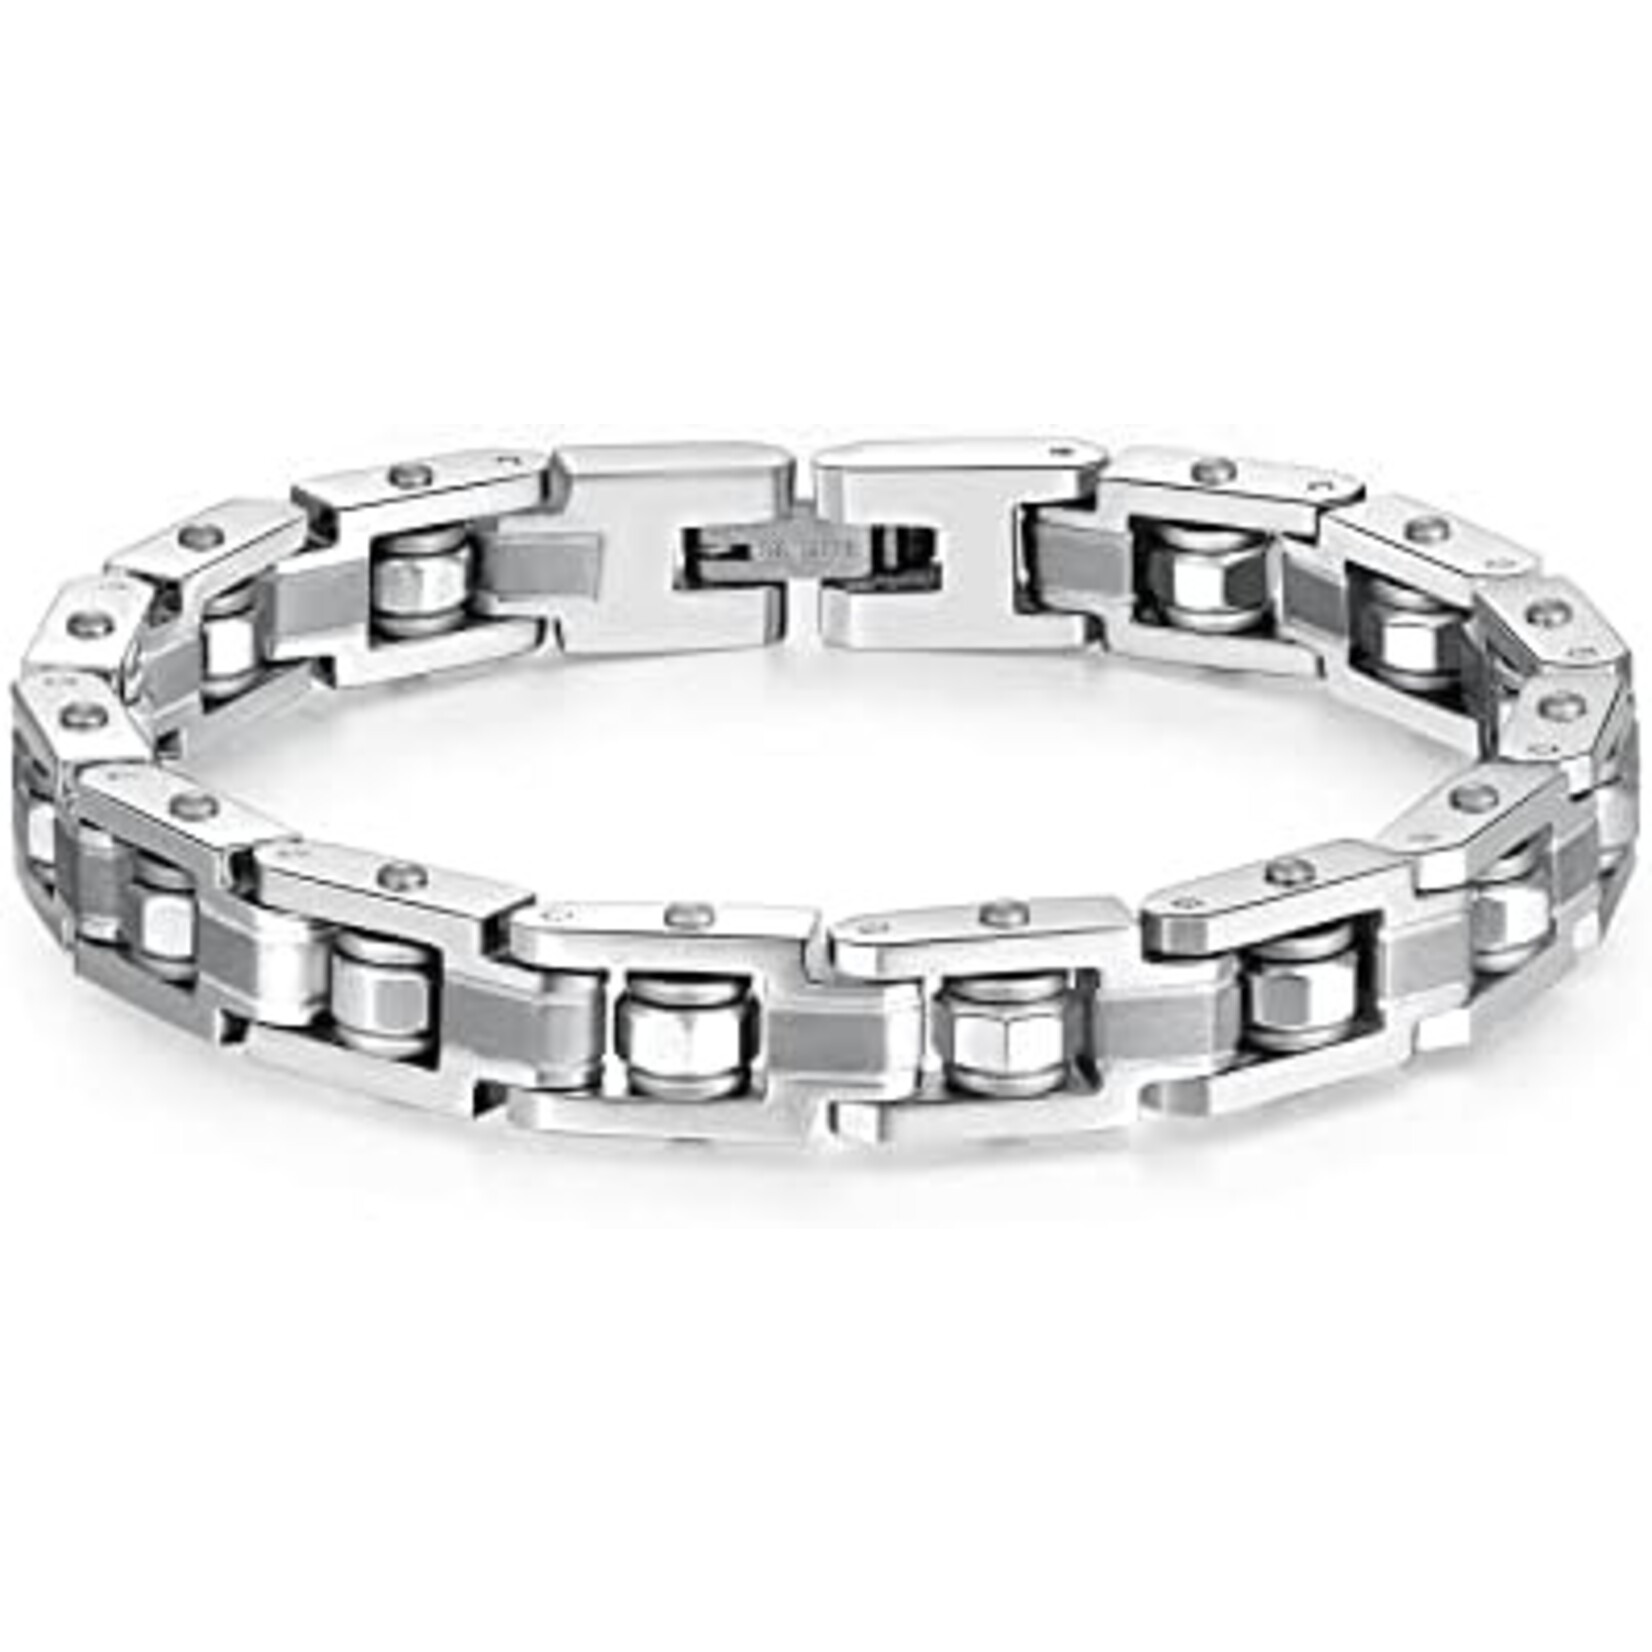 Brosway Stainless Steel Silver with Brushed Accents Link Bracelet